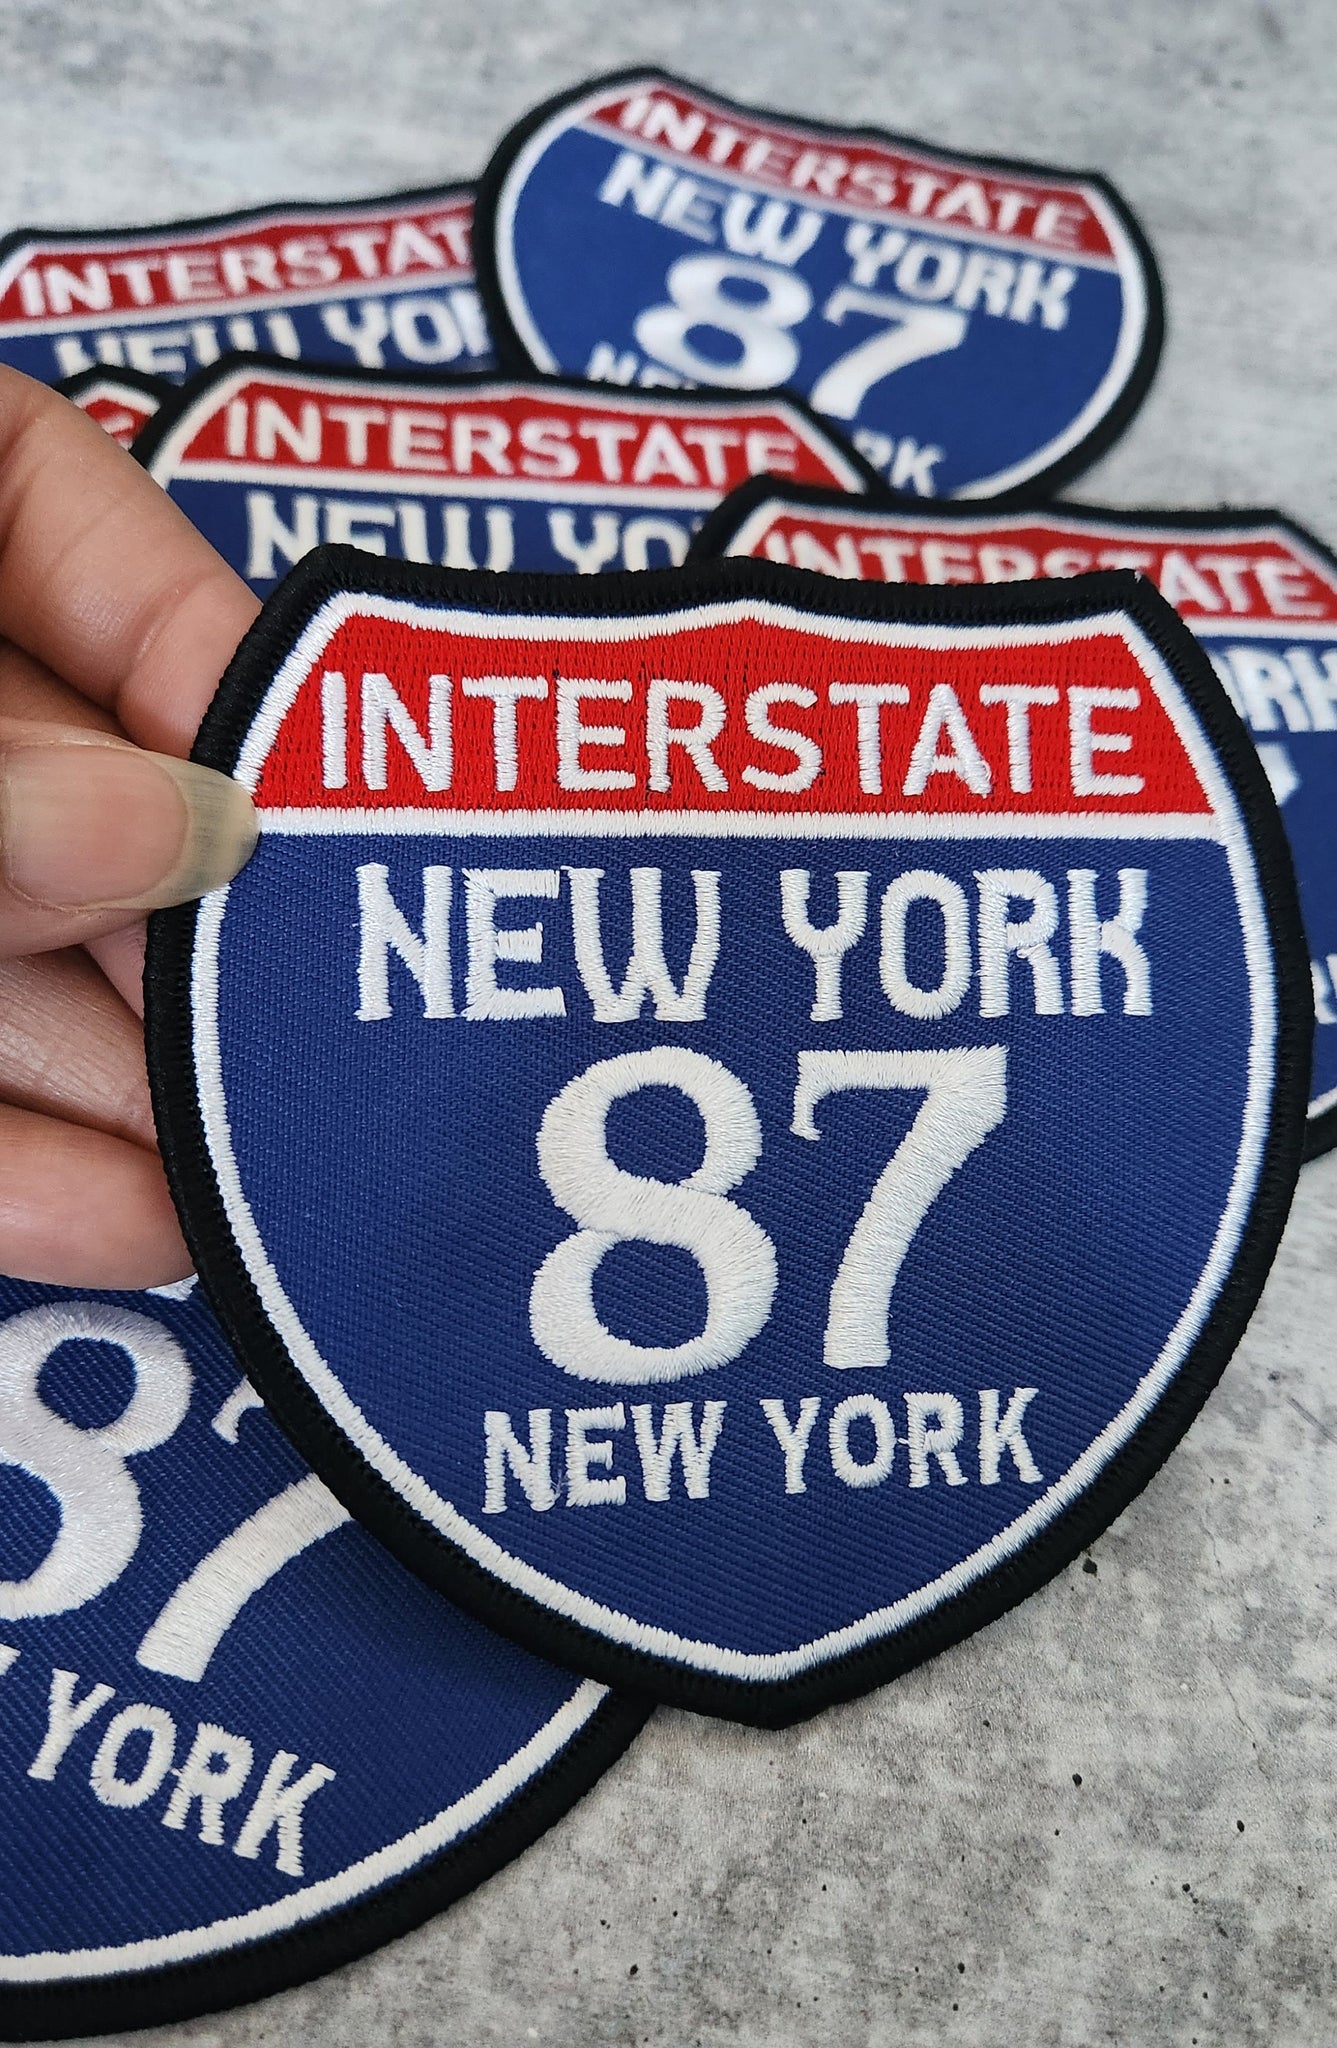 Collectable 1-pc, "NEW YORK 4" Interstate 87"  Iron-On Embroidered Patch; Popular New York Emblem, Red/White/Blue Badge, Patch for Jackets